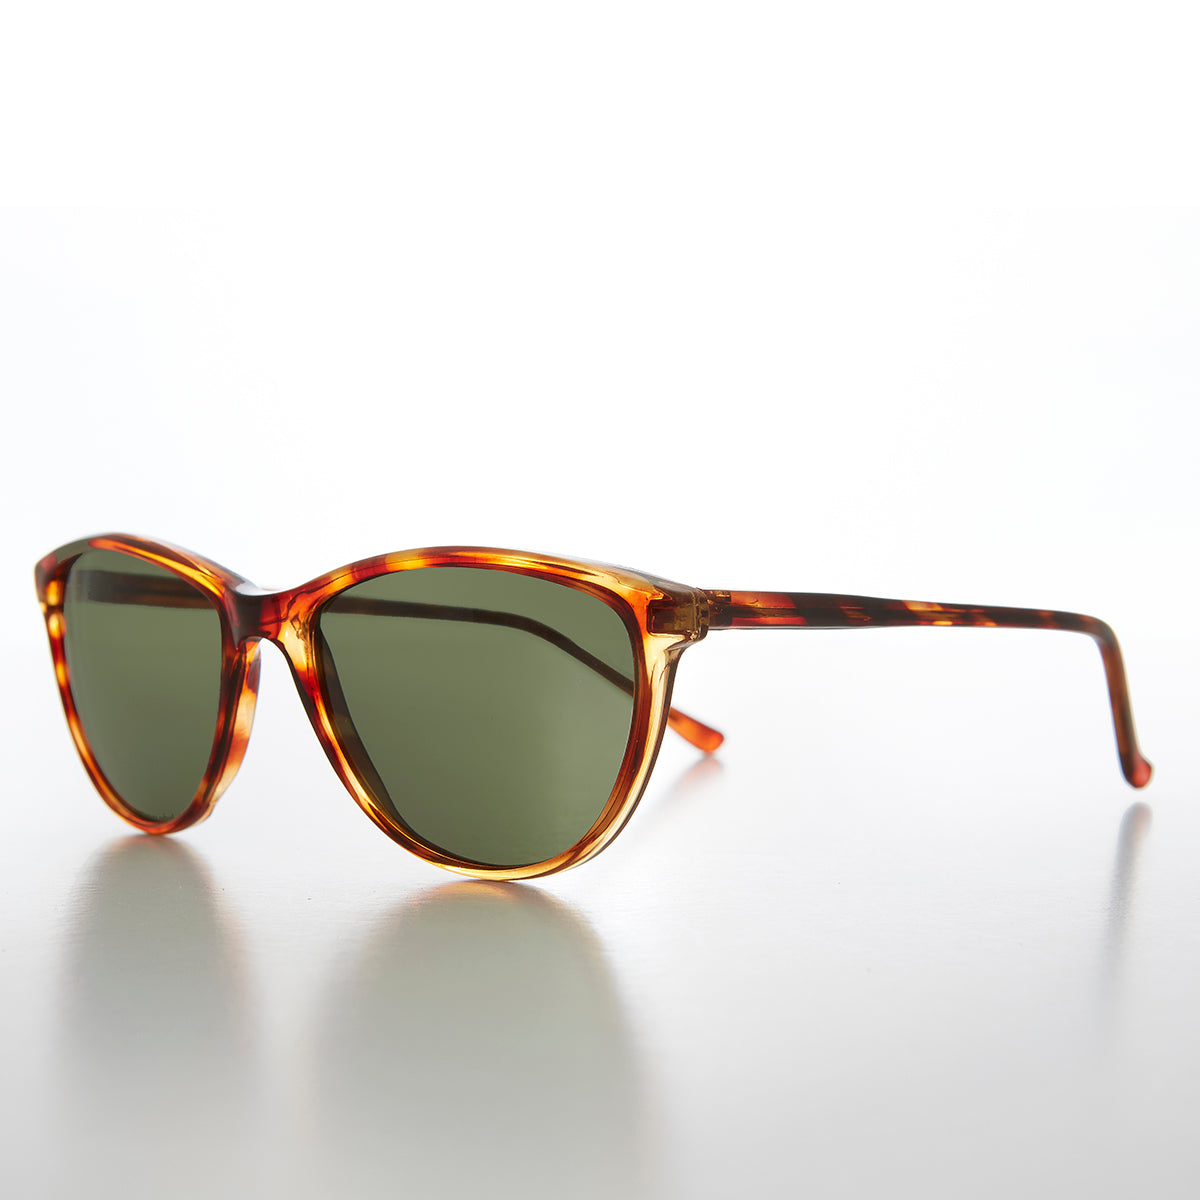 Classic Rounded Square Vintage Sunglass